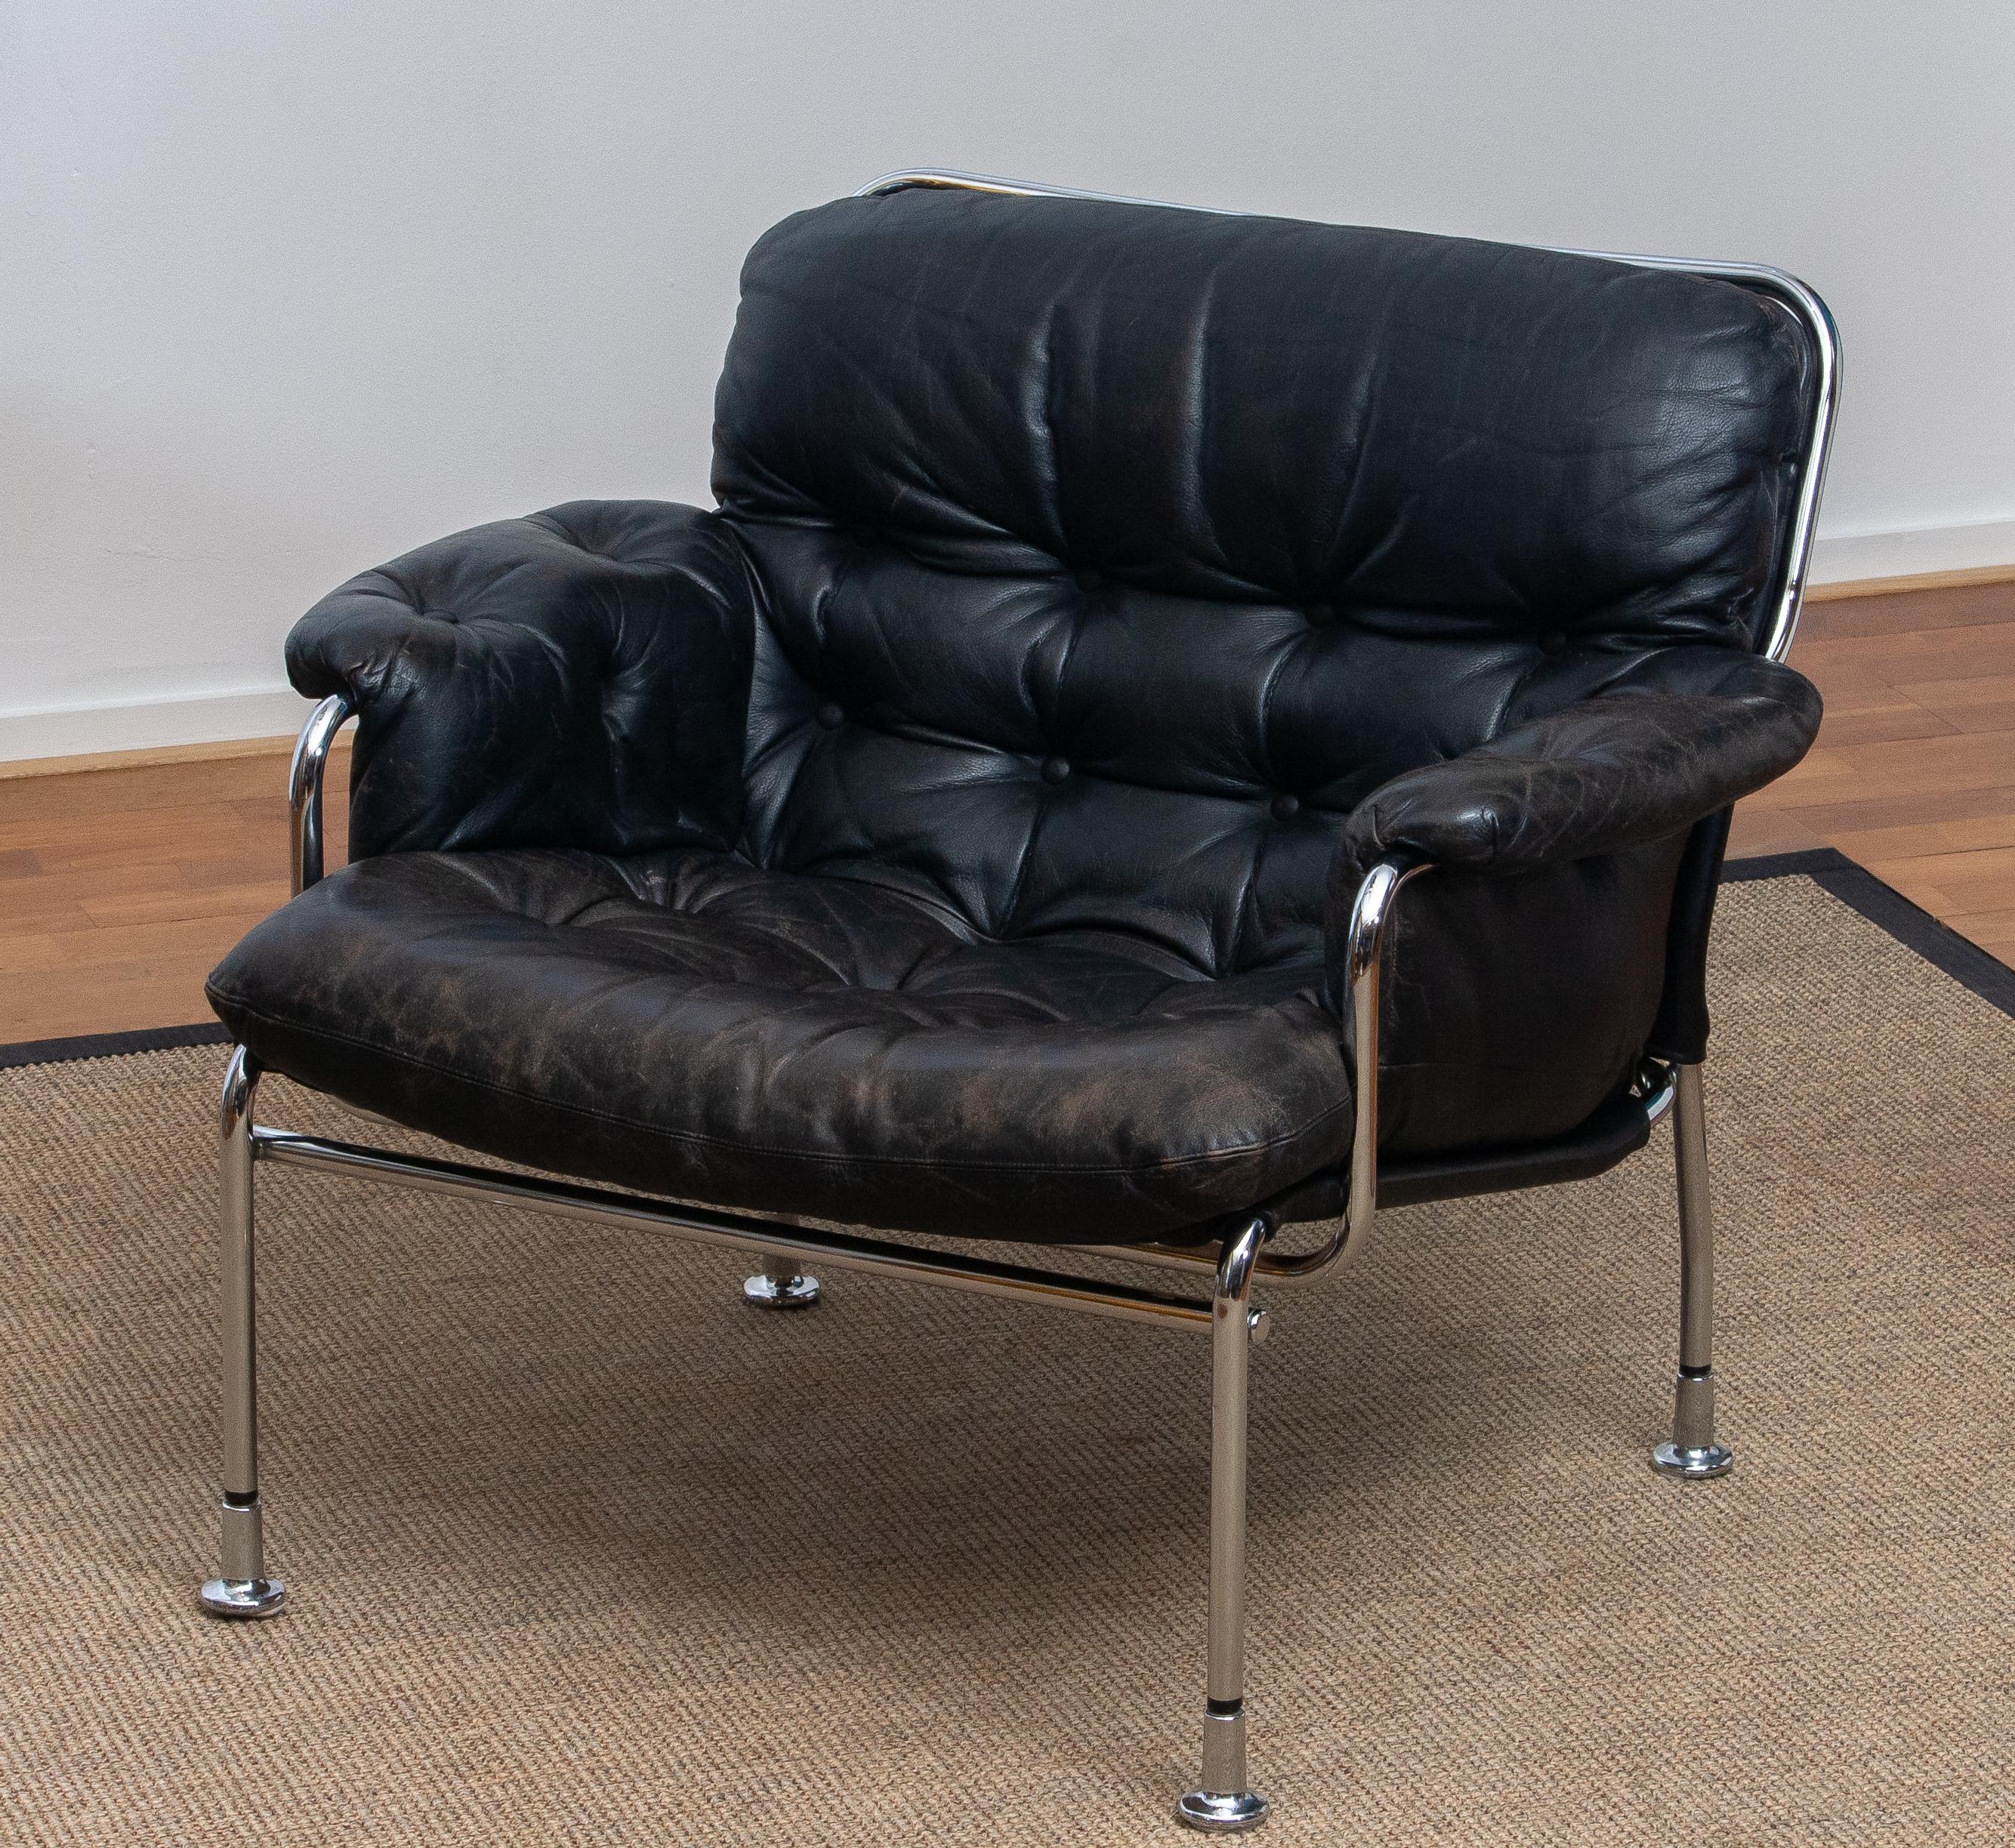 Beautiful lounge / easy chair in aged black leather and tubular chrome metal designed by Pethrus Lindlöfs for A.B. Lindlöfs Möbler Lammhult Sweden. Model Eva.
The aged leather gives this chair the typical vintage character. The leather is soft and